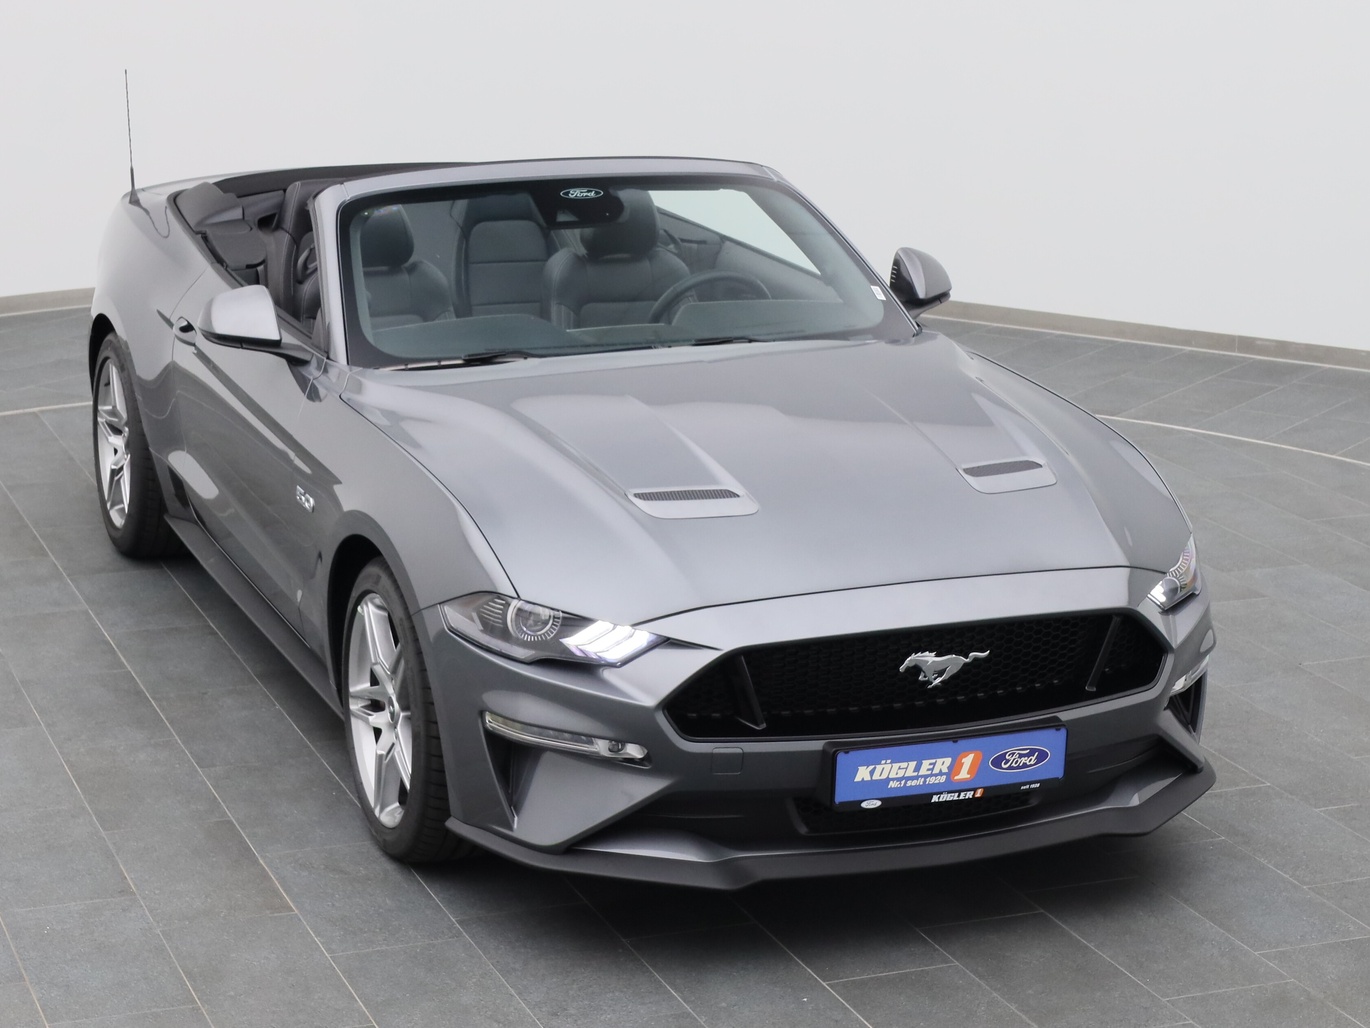  Ford Mustang GT Cabrio V8 450PS Aut. / Premium 4 in Carbonized Gray 